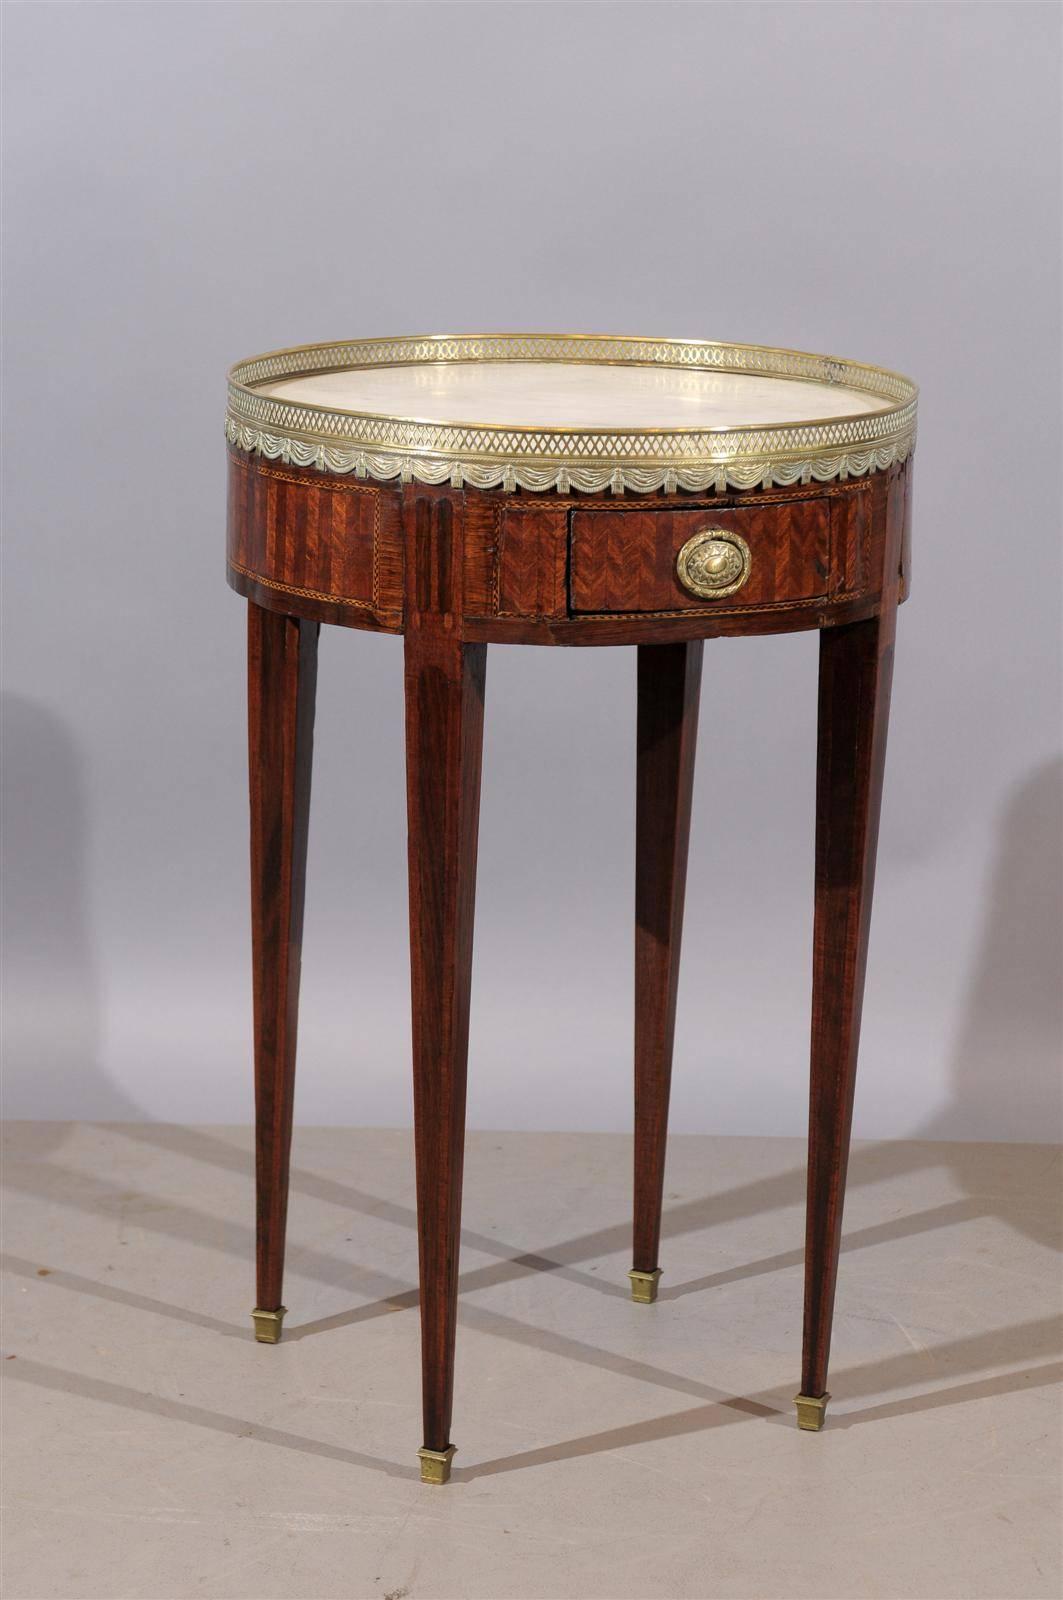 19th century French Louis XVI style tulipwood inlaid bouillotte table with white marble top and brass gallery.